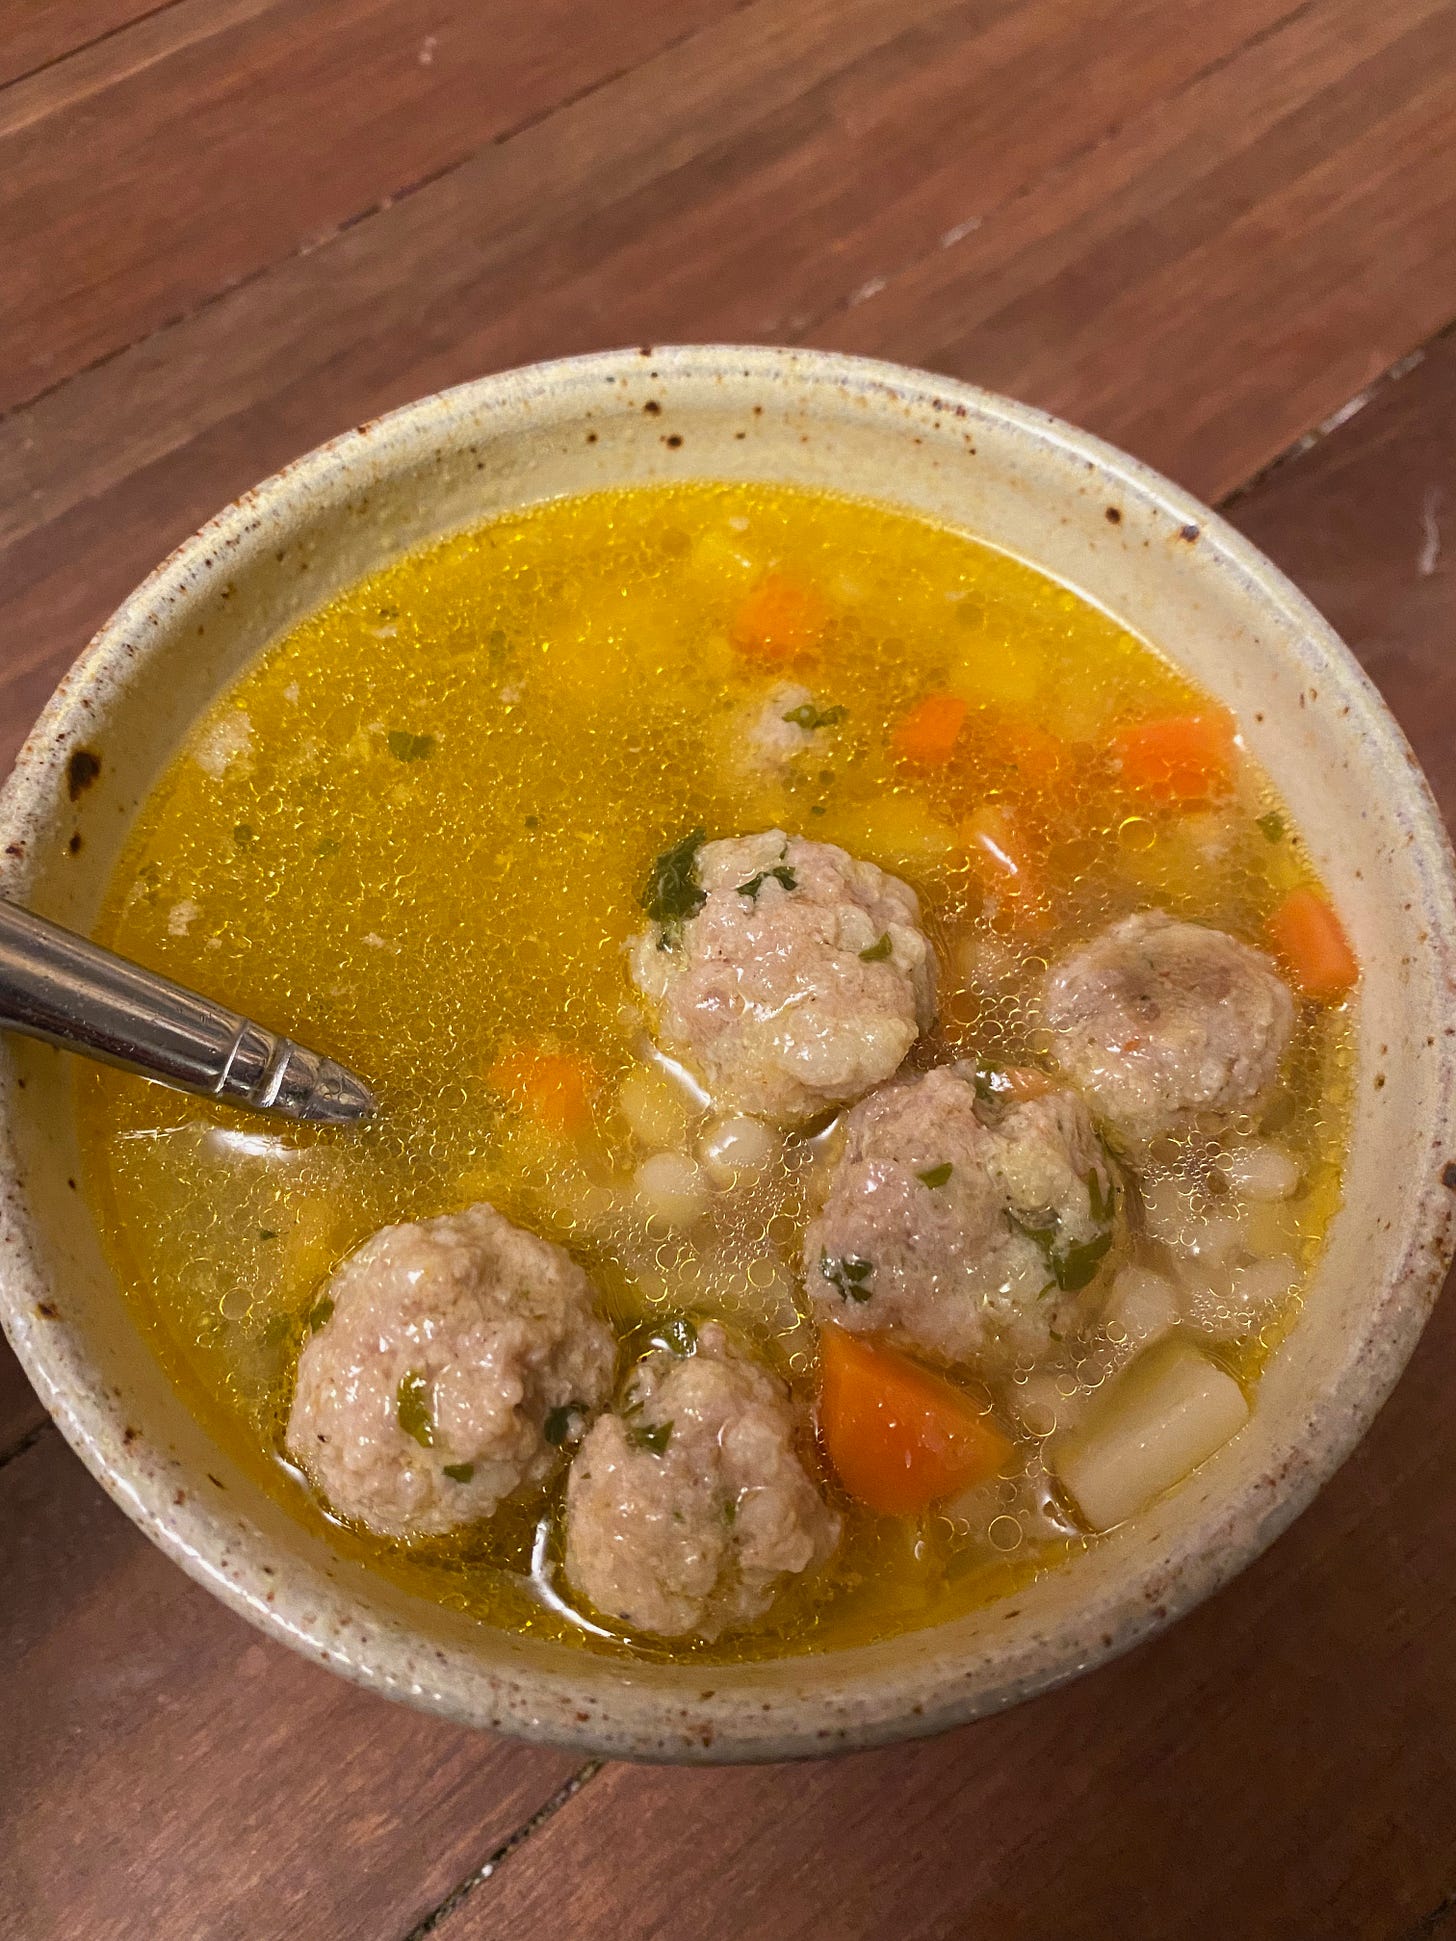 A ceramic bowl filled with deep golden chicken broth. Several small meatballs float on top, along with small pieces of carrot, and pearl couscous.